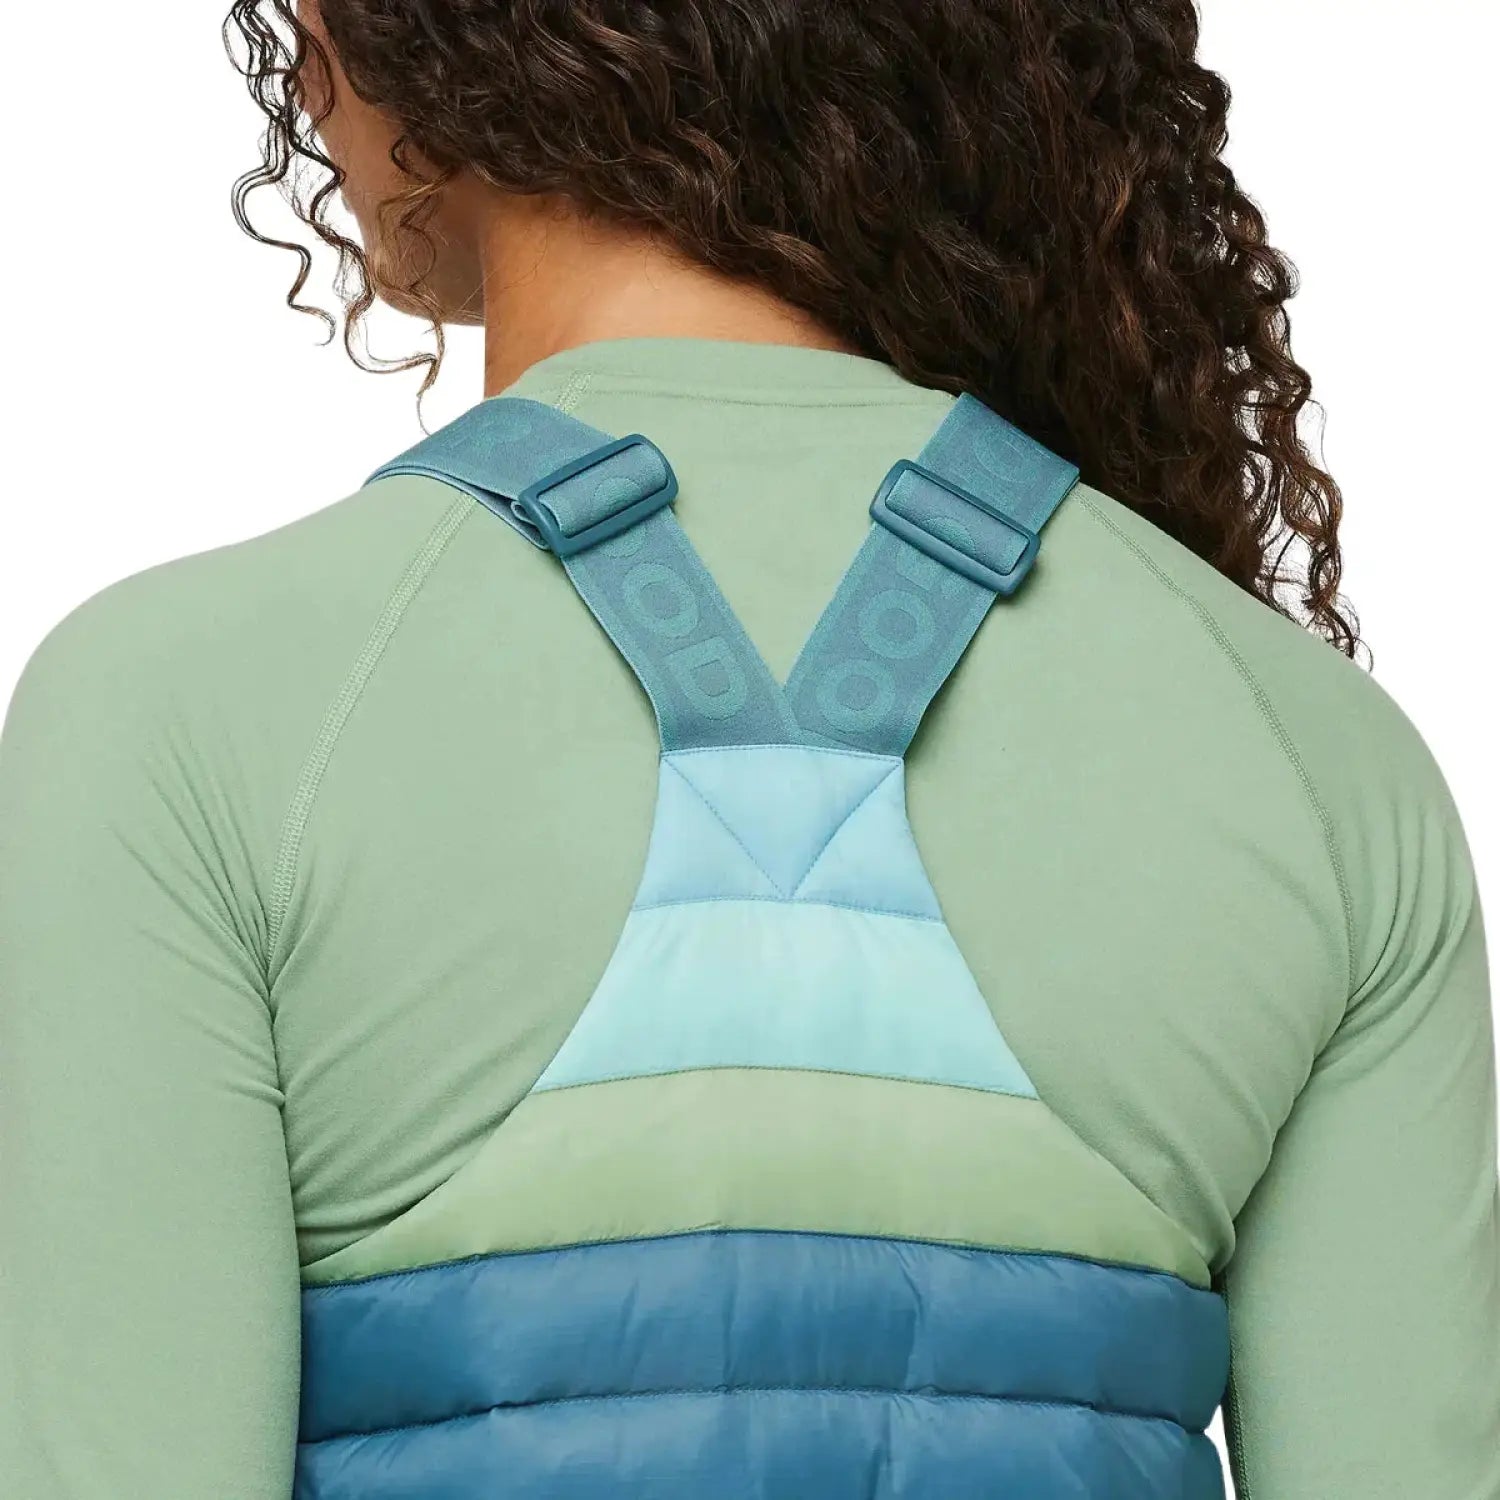 Cotopaxi W's Fuego Down Overall, Blue Spruce Stripe, back view of straps on model